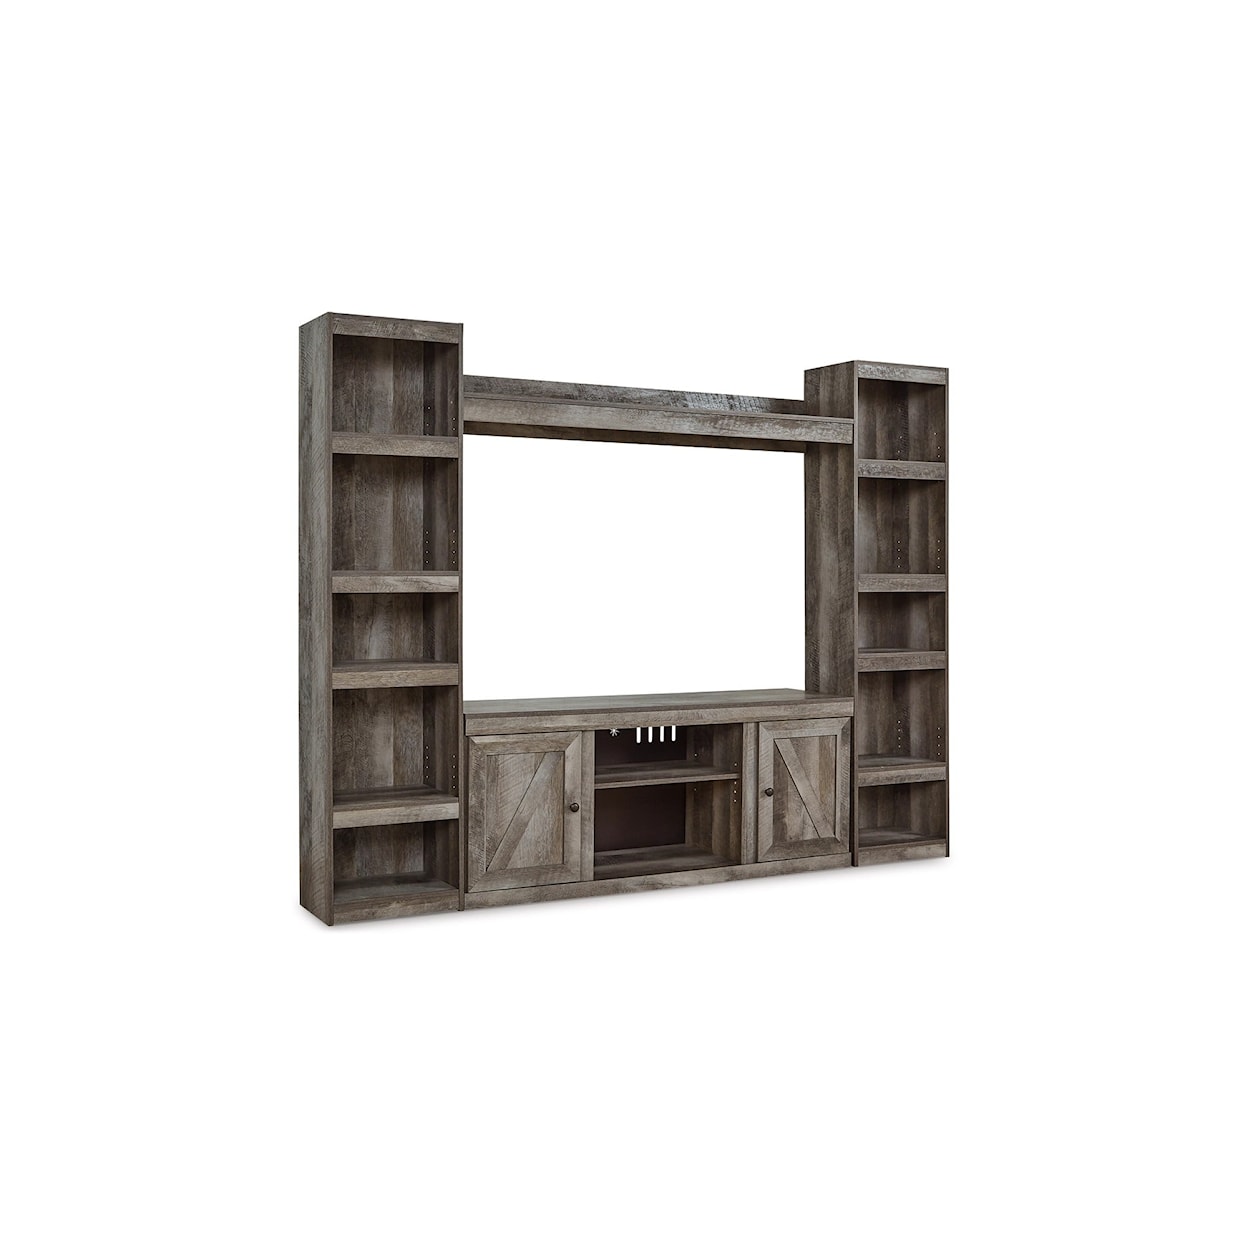 Signature Design by Ashley Furniture Wynnlow Entertainment Center with Piers & Bridge